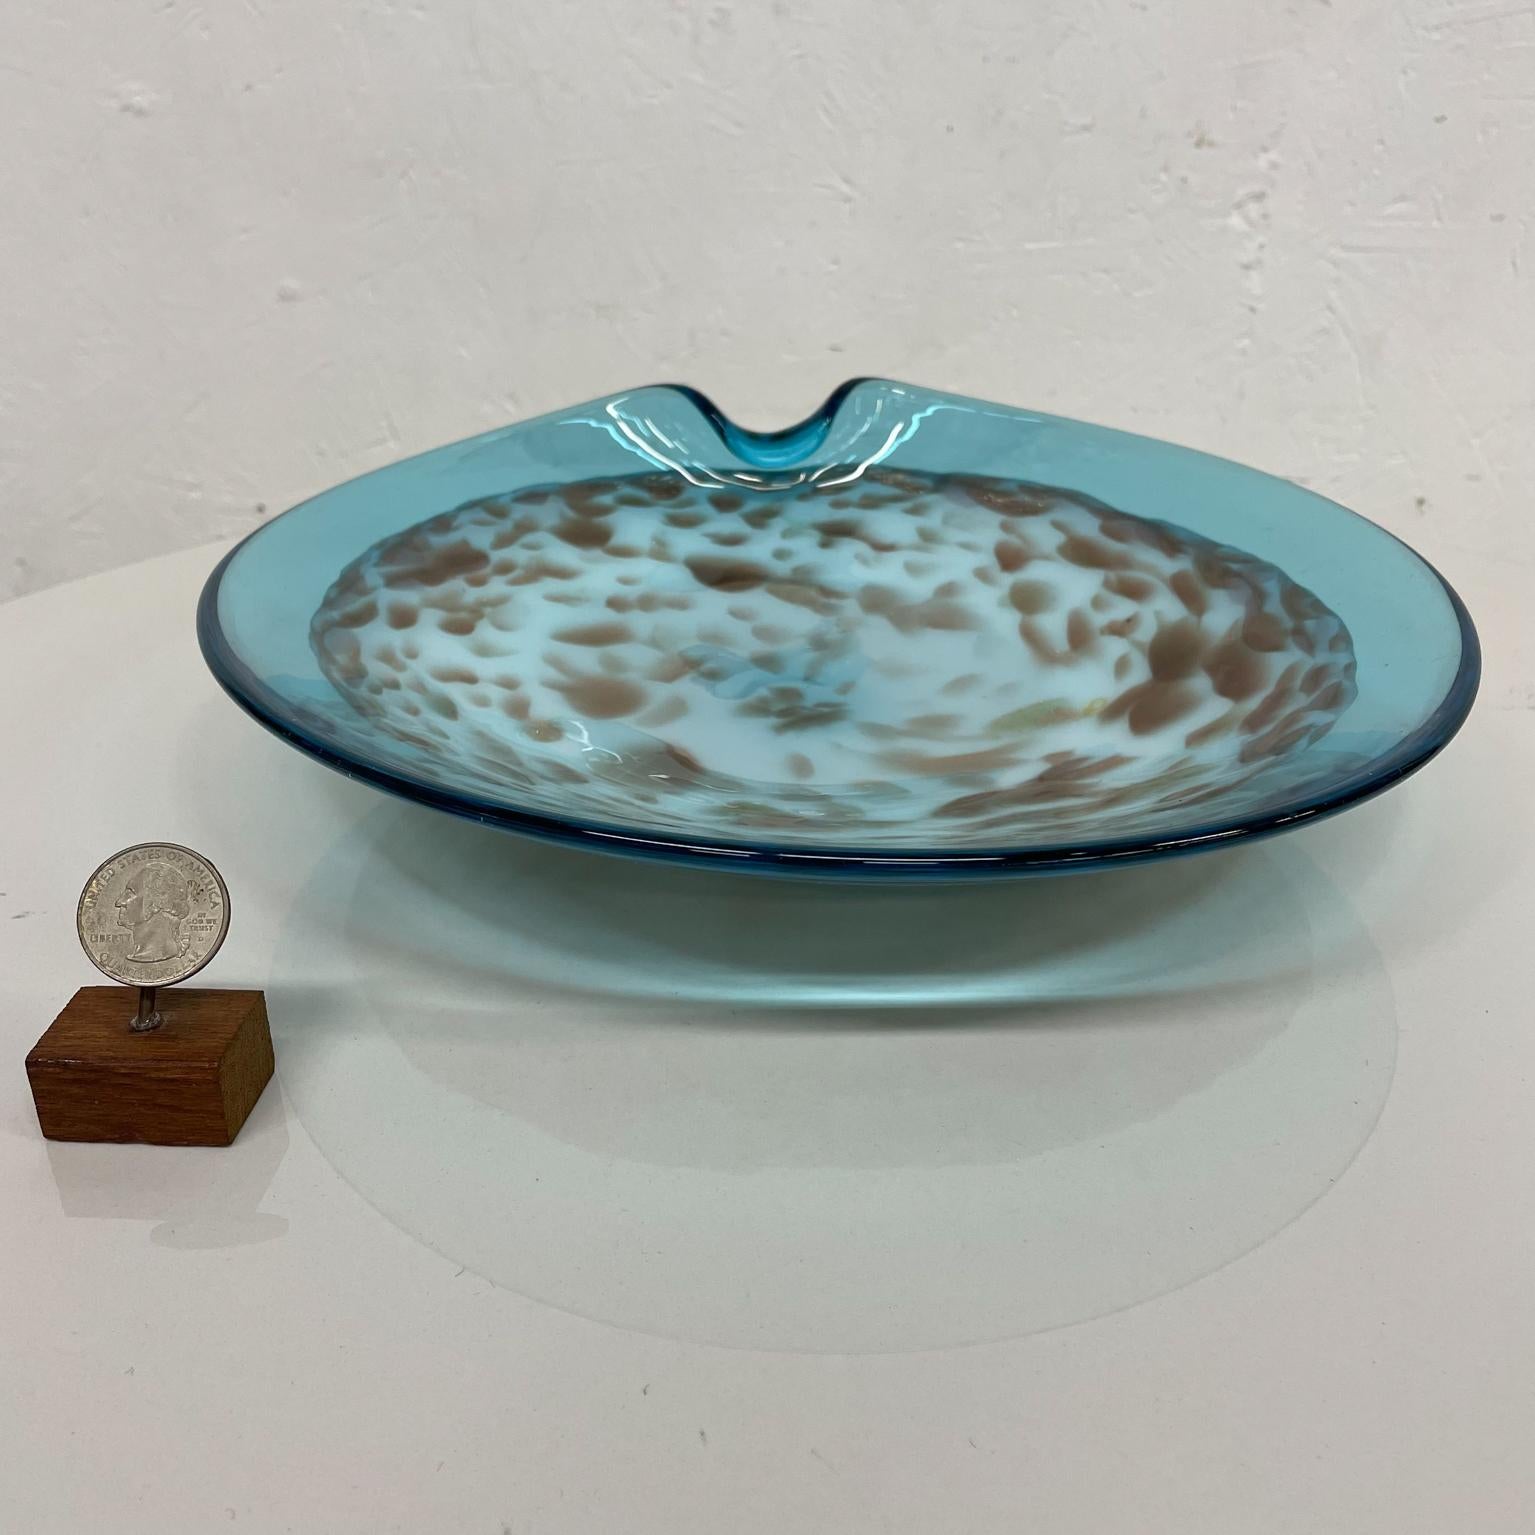 Decorative dish
Italian art glass blue decorative plate in the style of Sommerso Murano Glass Italy 1960s
Unmarked
Measures: 11.13 diameter 2.38 height
Original preowned vintage unrestored condition.
See images please.

 
 